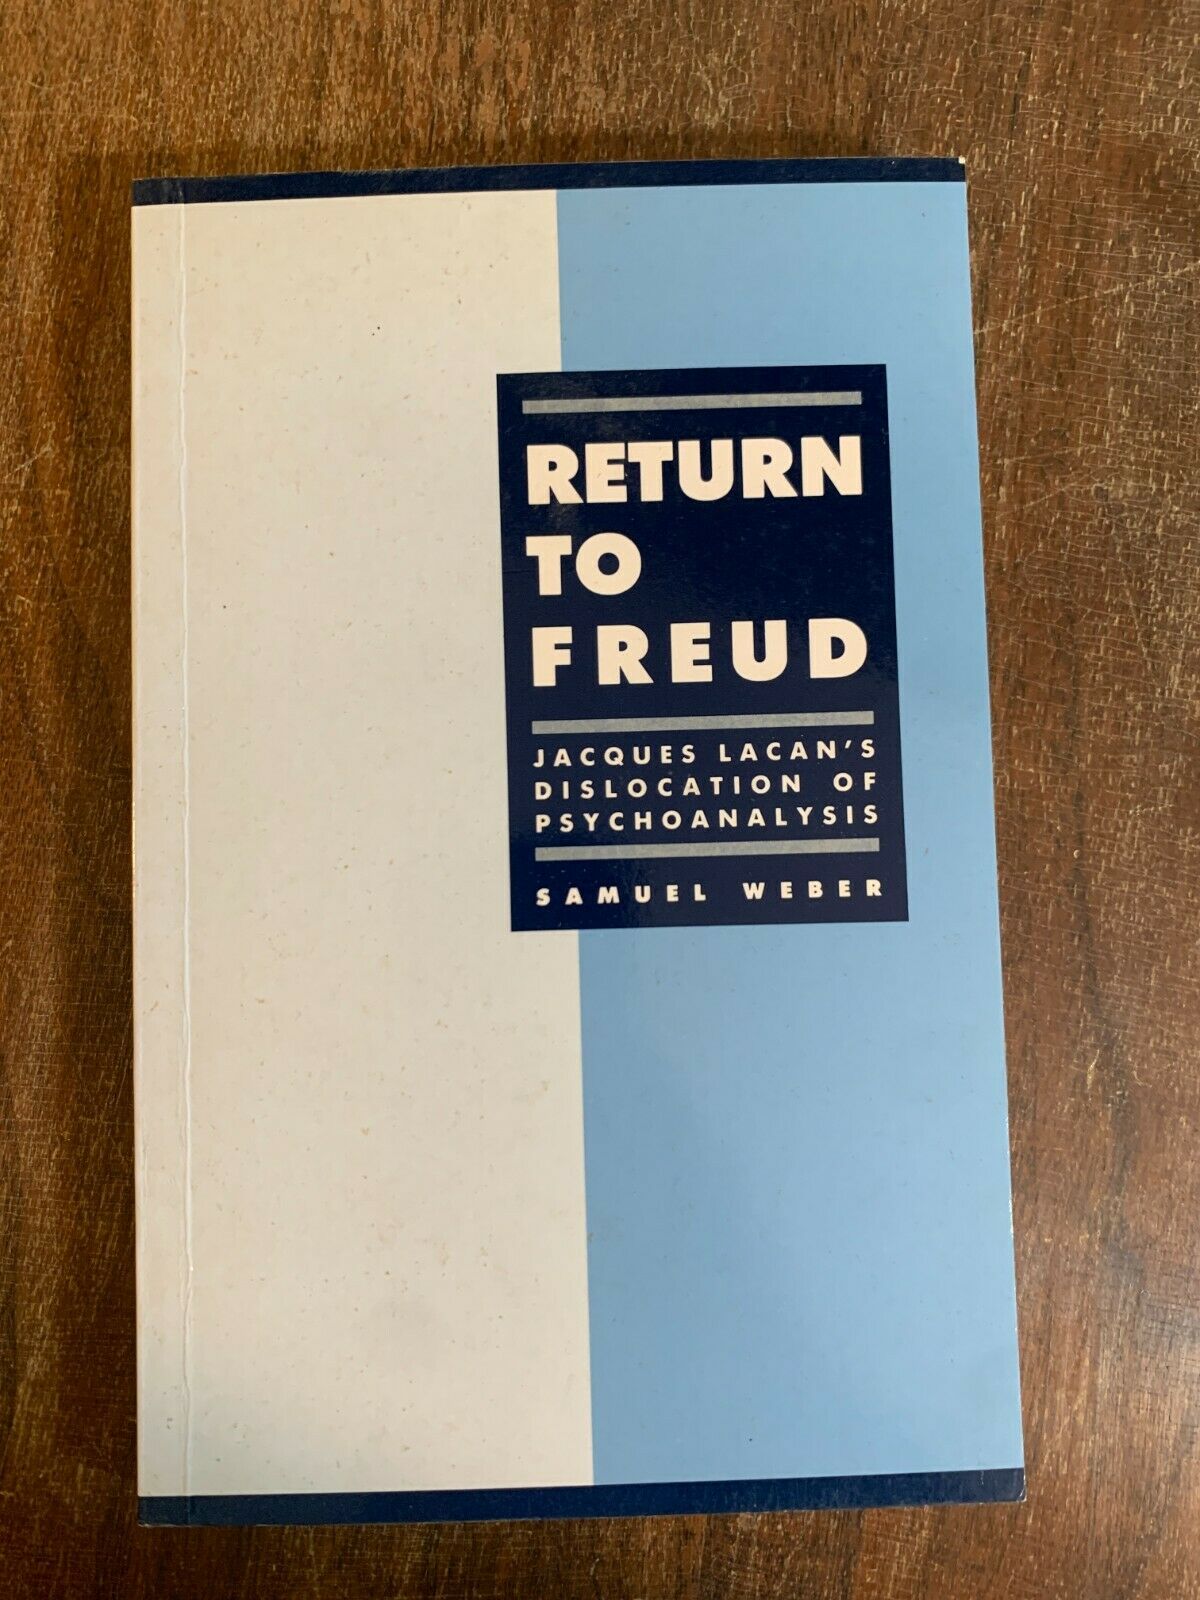 Return To Freud Jaques Lacan's Dislocation of Psychoanalysis, Samuel Weber Z1